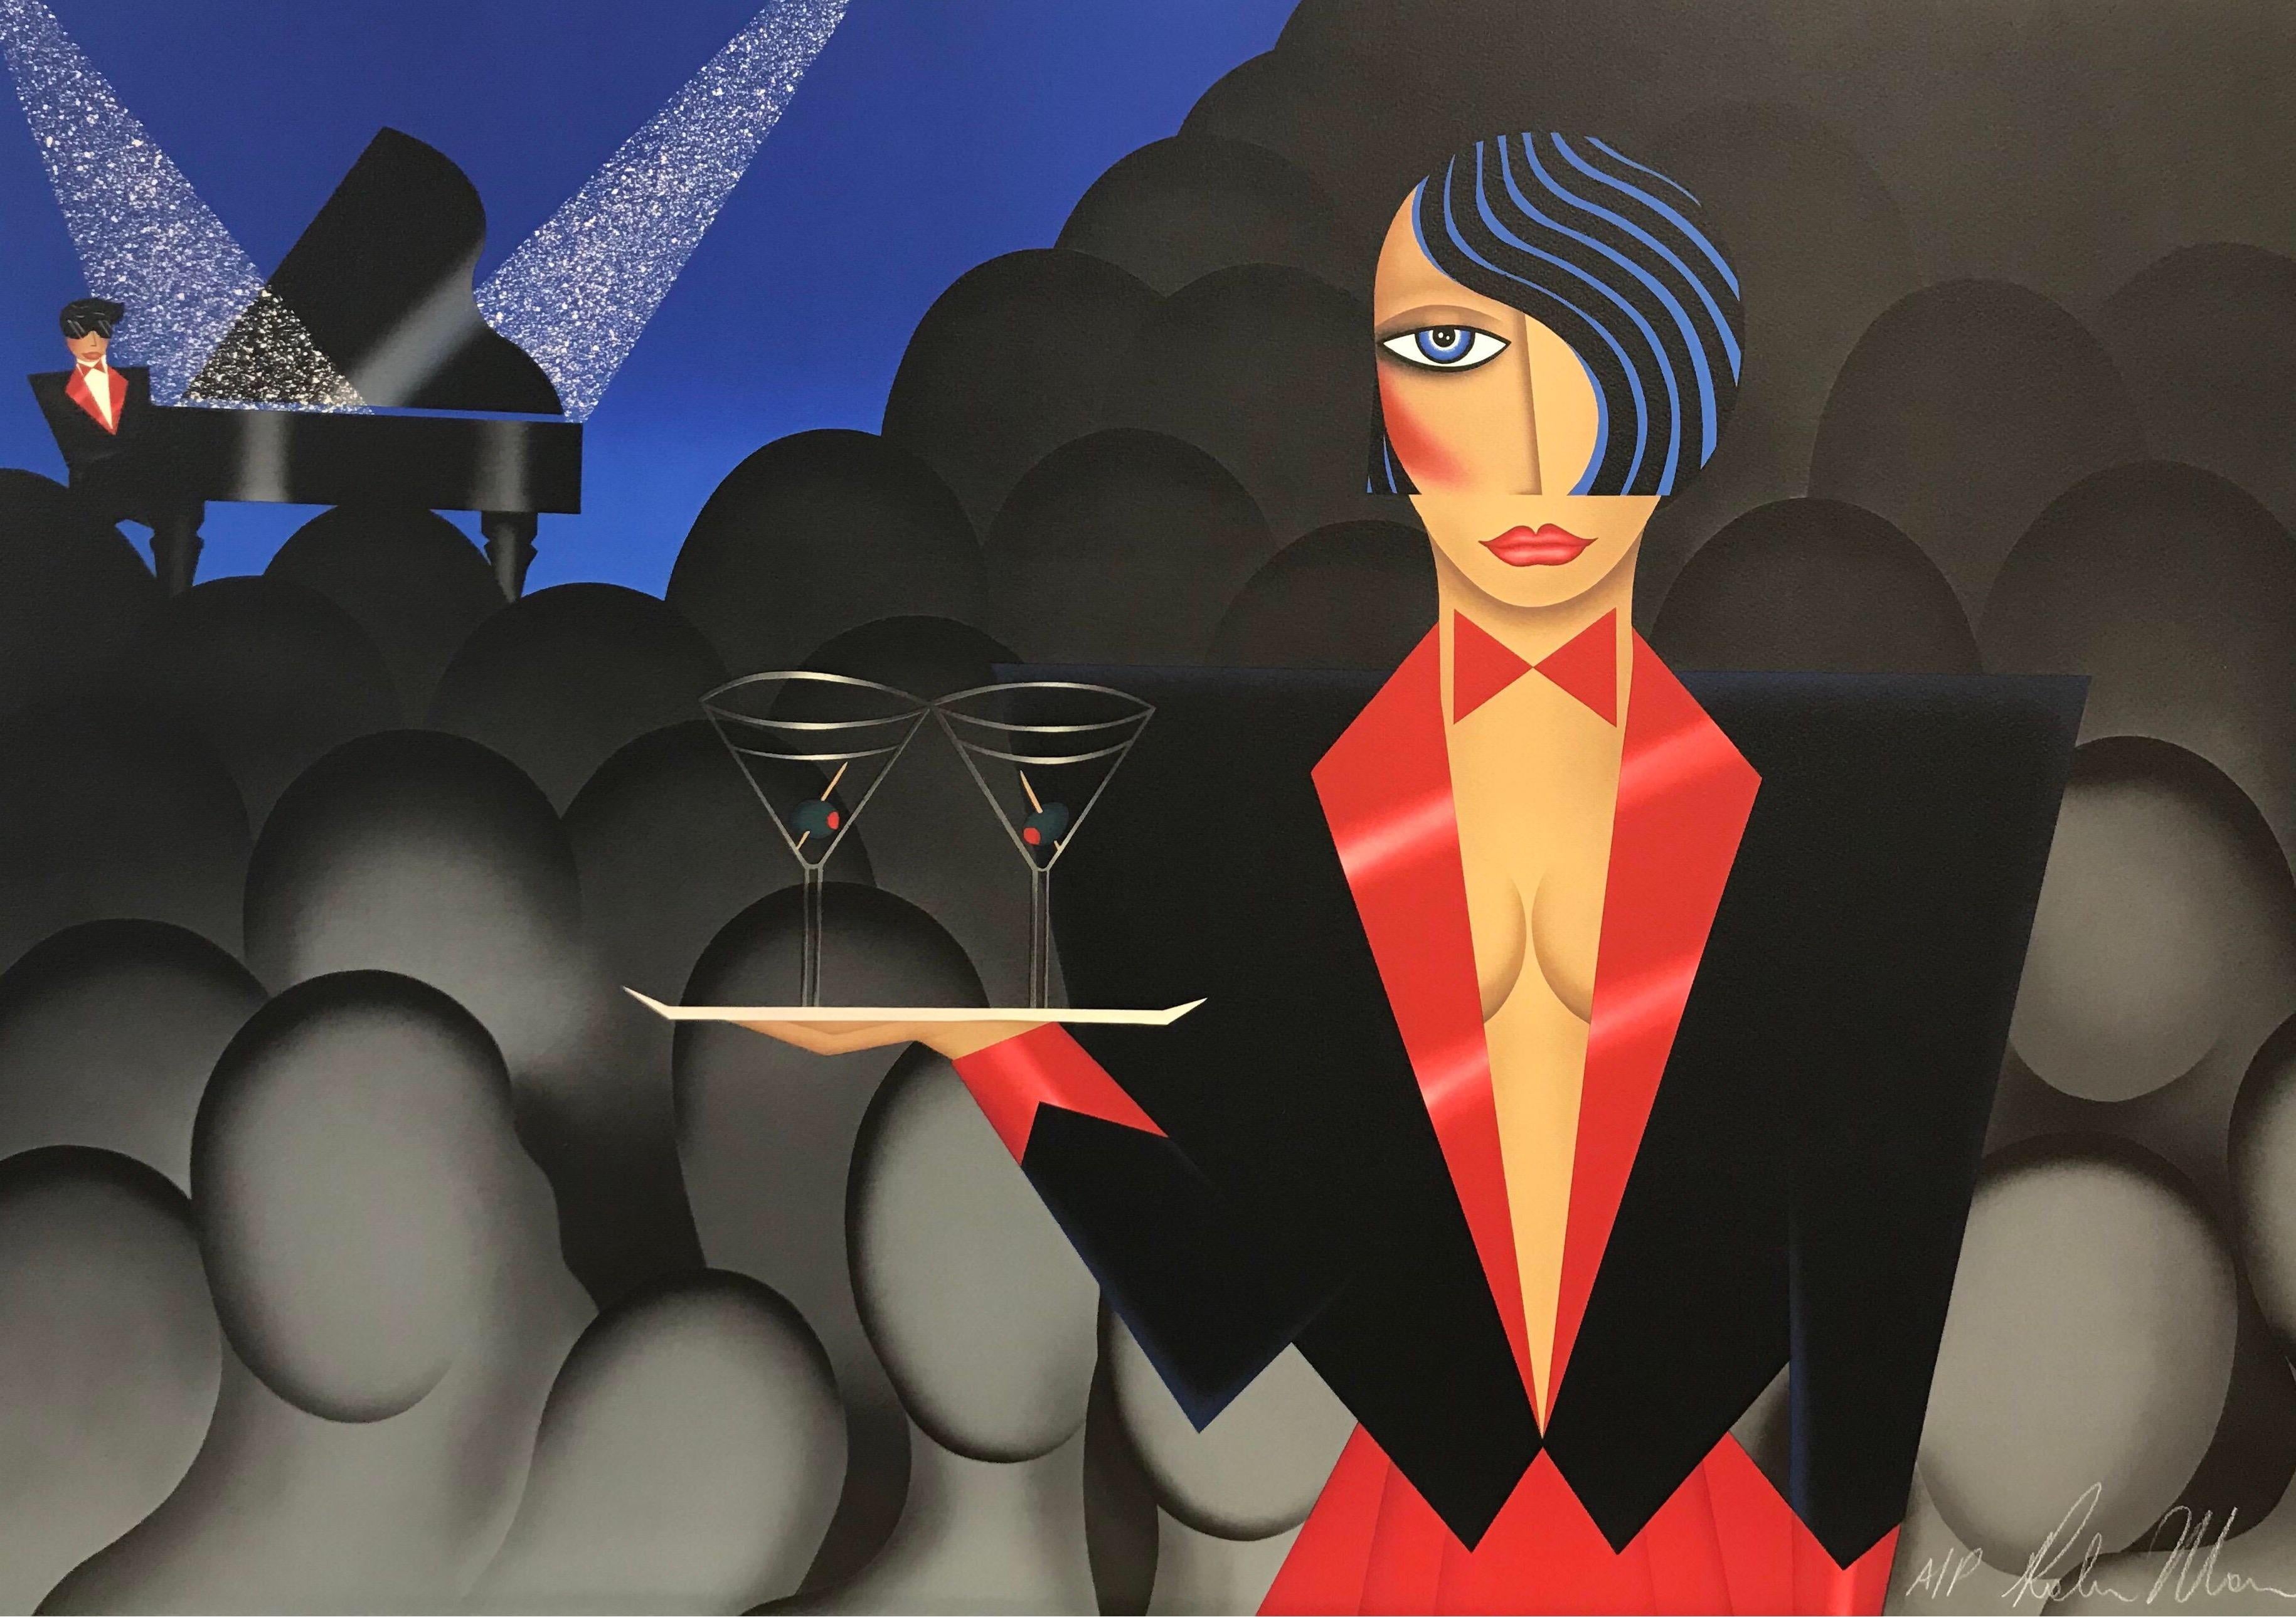 Robin Morris Portrait Print - ALONE IN A CROWD Signed Lithograph, Woman Cocktail Waitress, Martini, Art Deco 